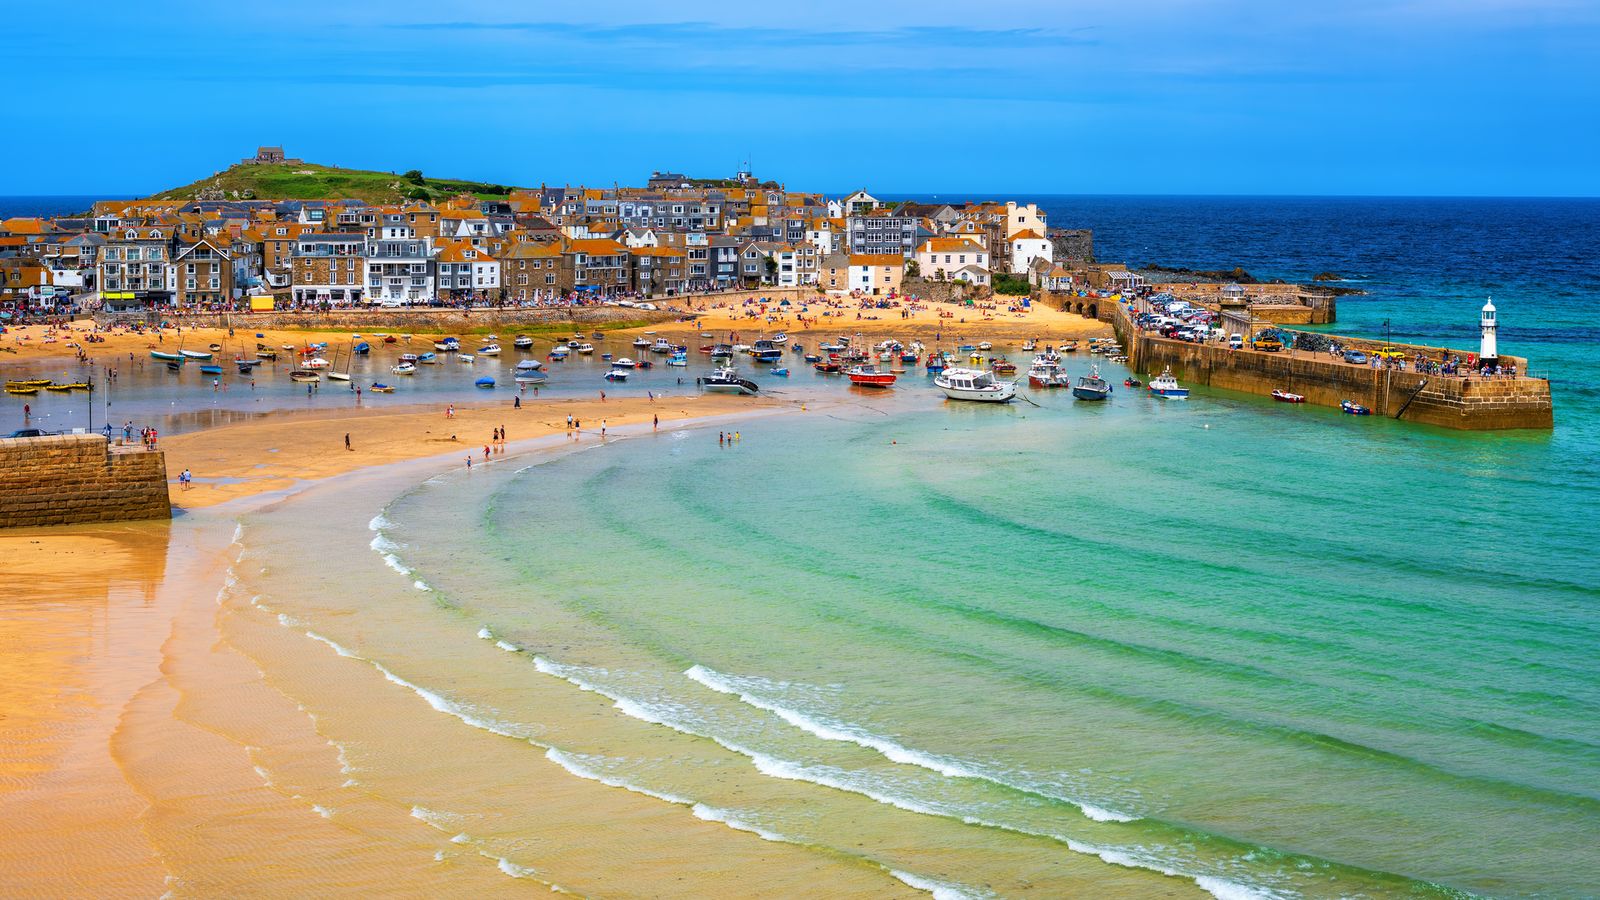 St Ives named Britain's happiest place to live in 2022